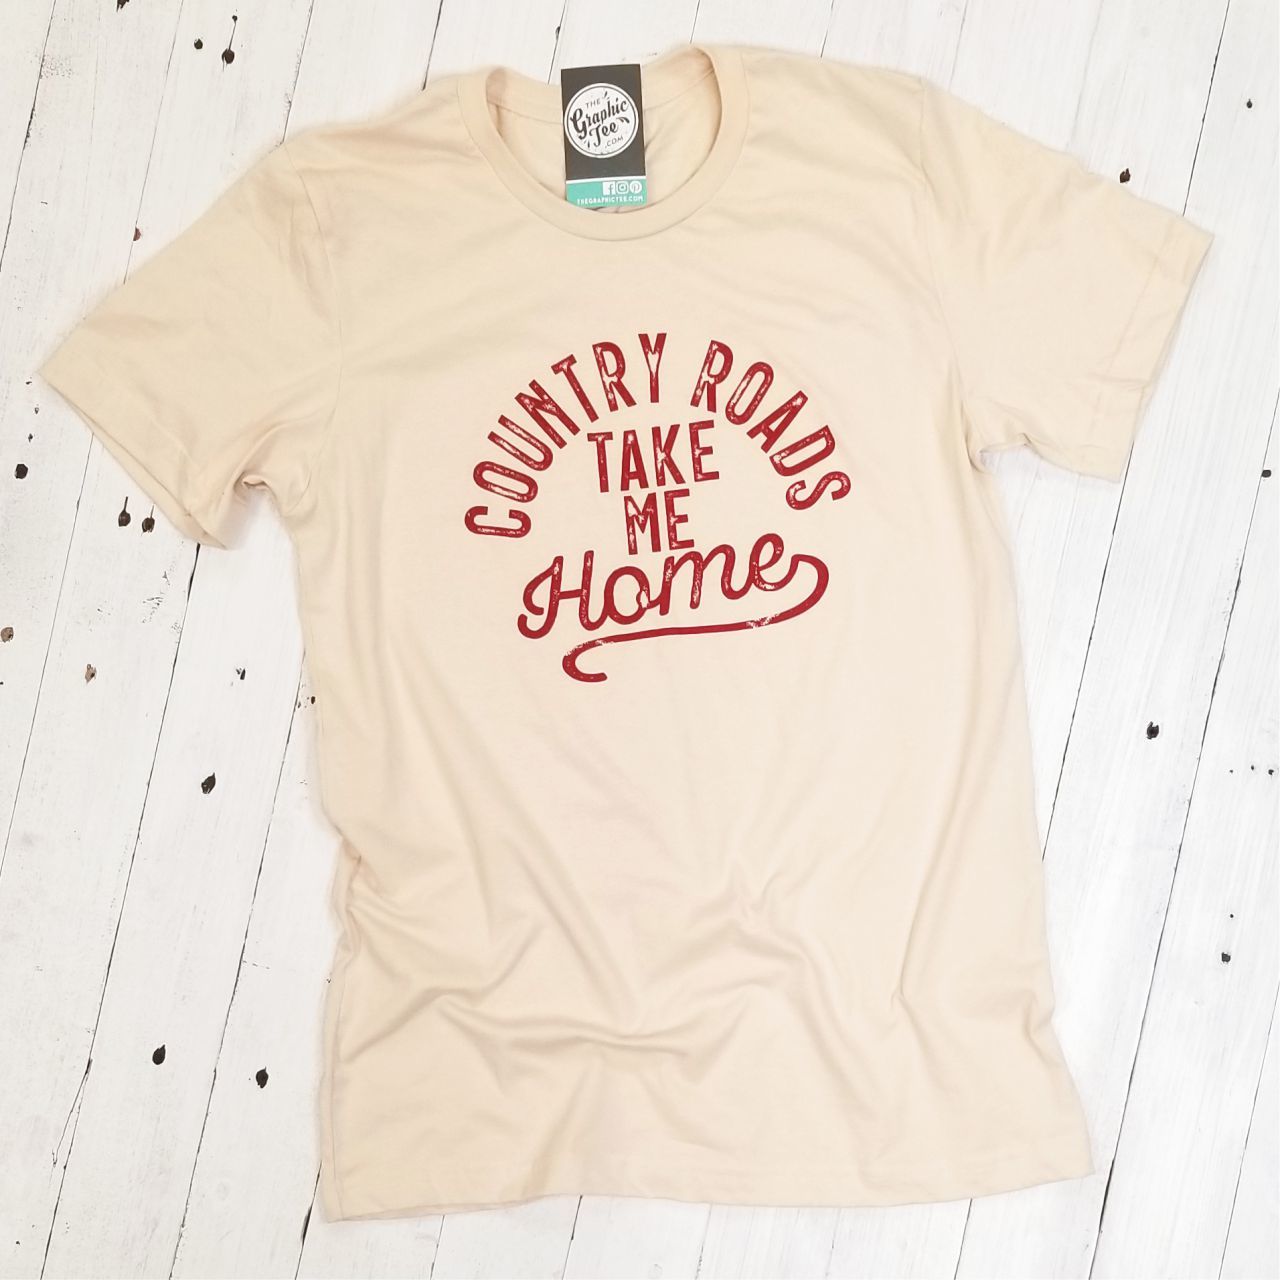 Country Roads Take Me Home - Unisex Tee - The Graphic Tee